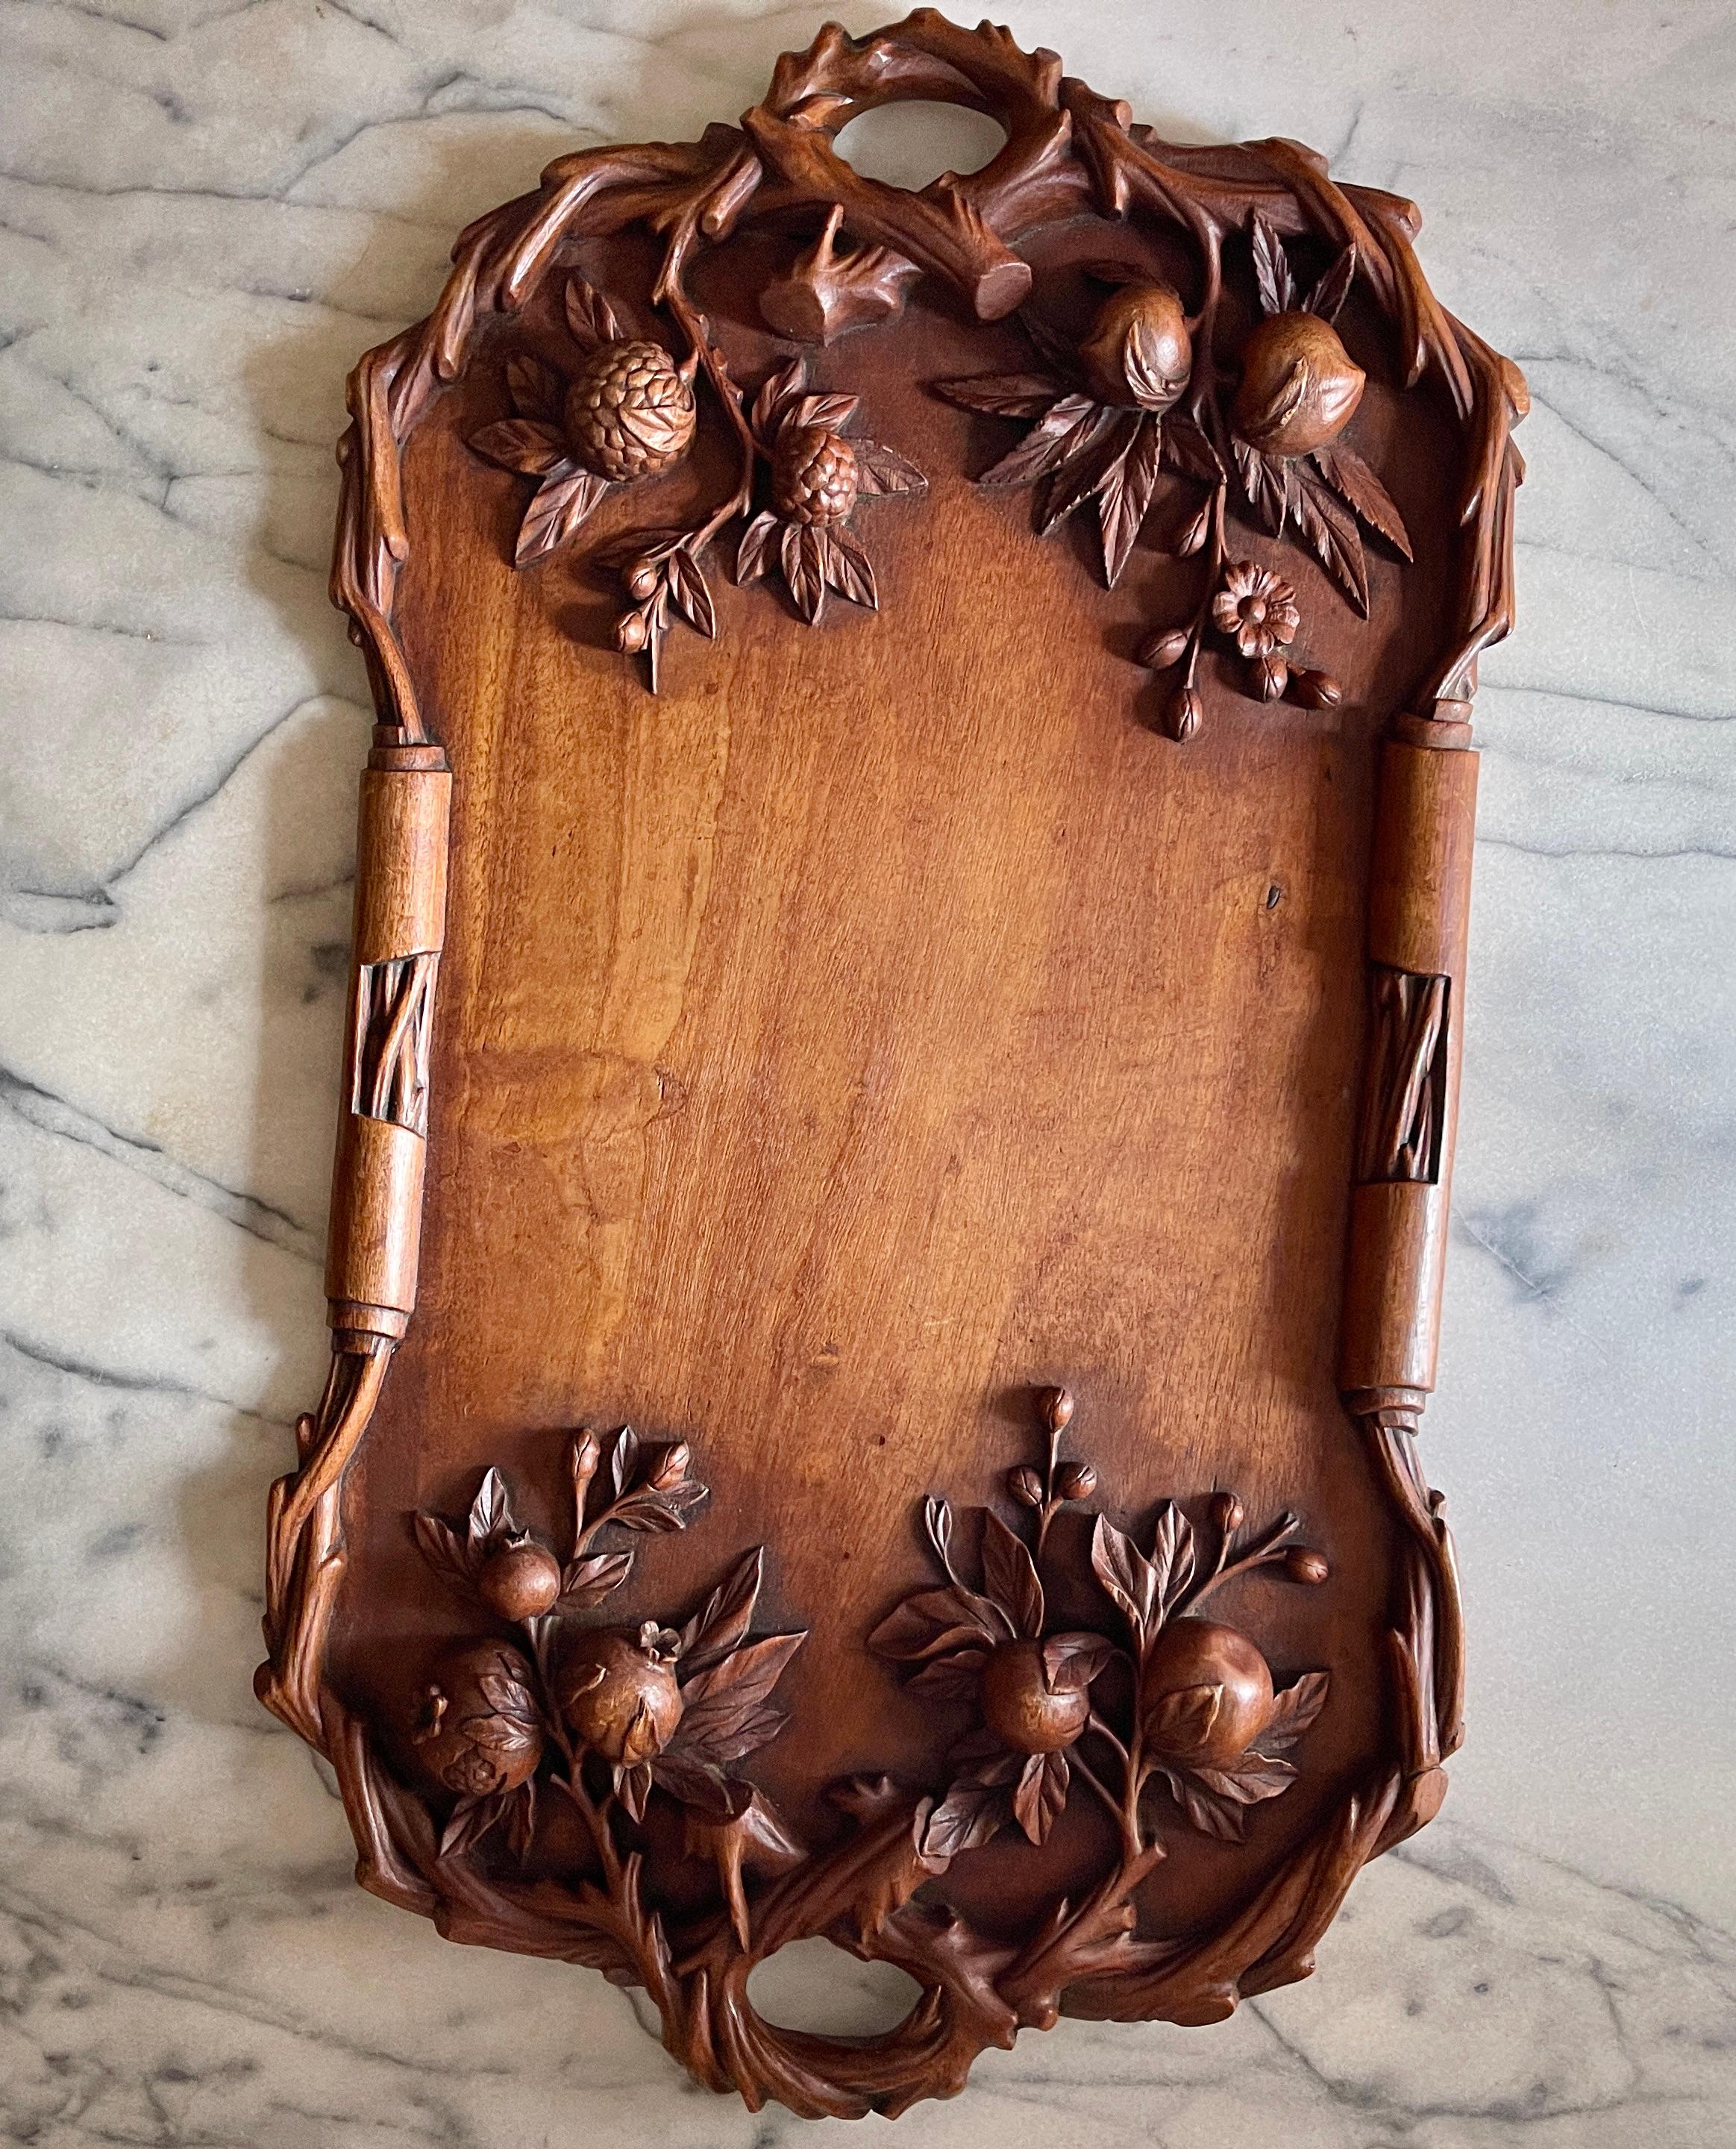 19th C Rustic Black Forest Hand Carved Walnut Branching Fruit Serving Tray For Sale 2